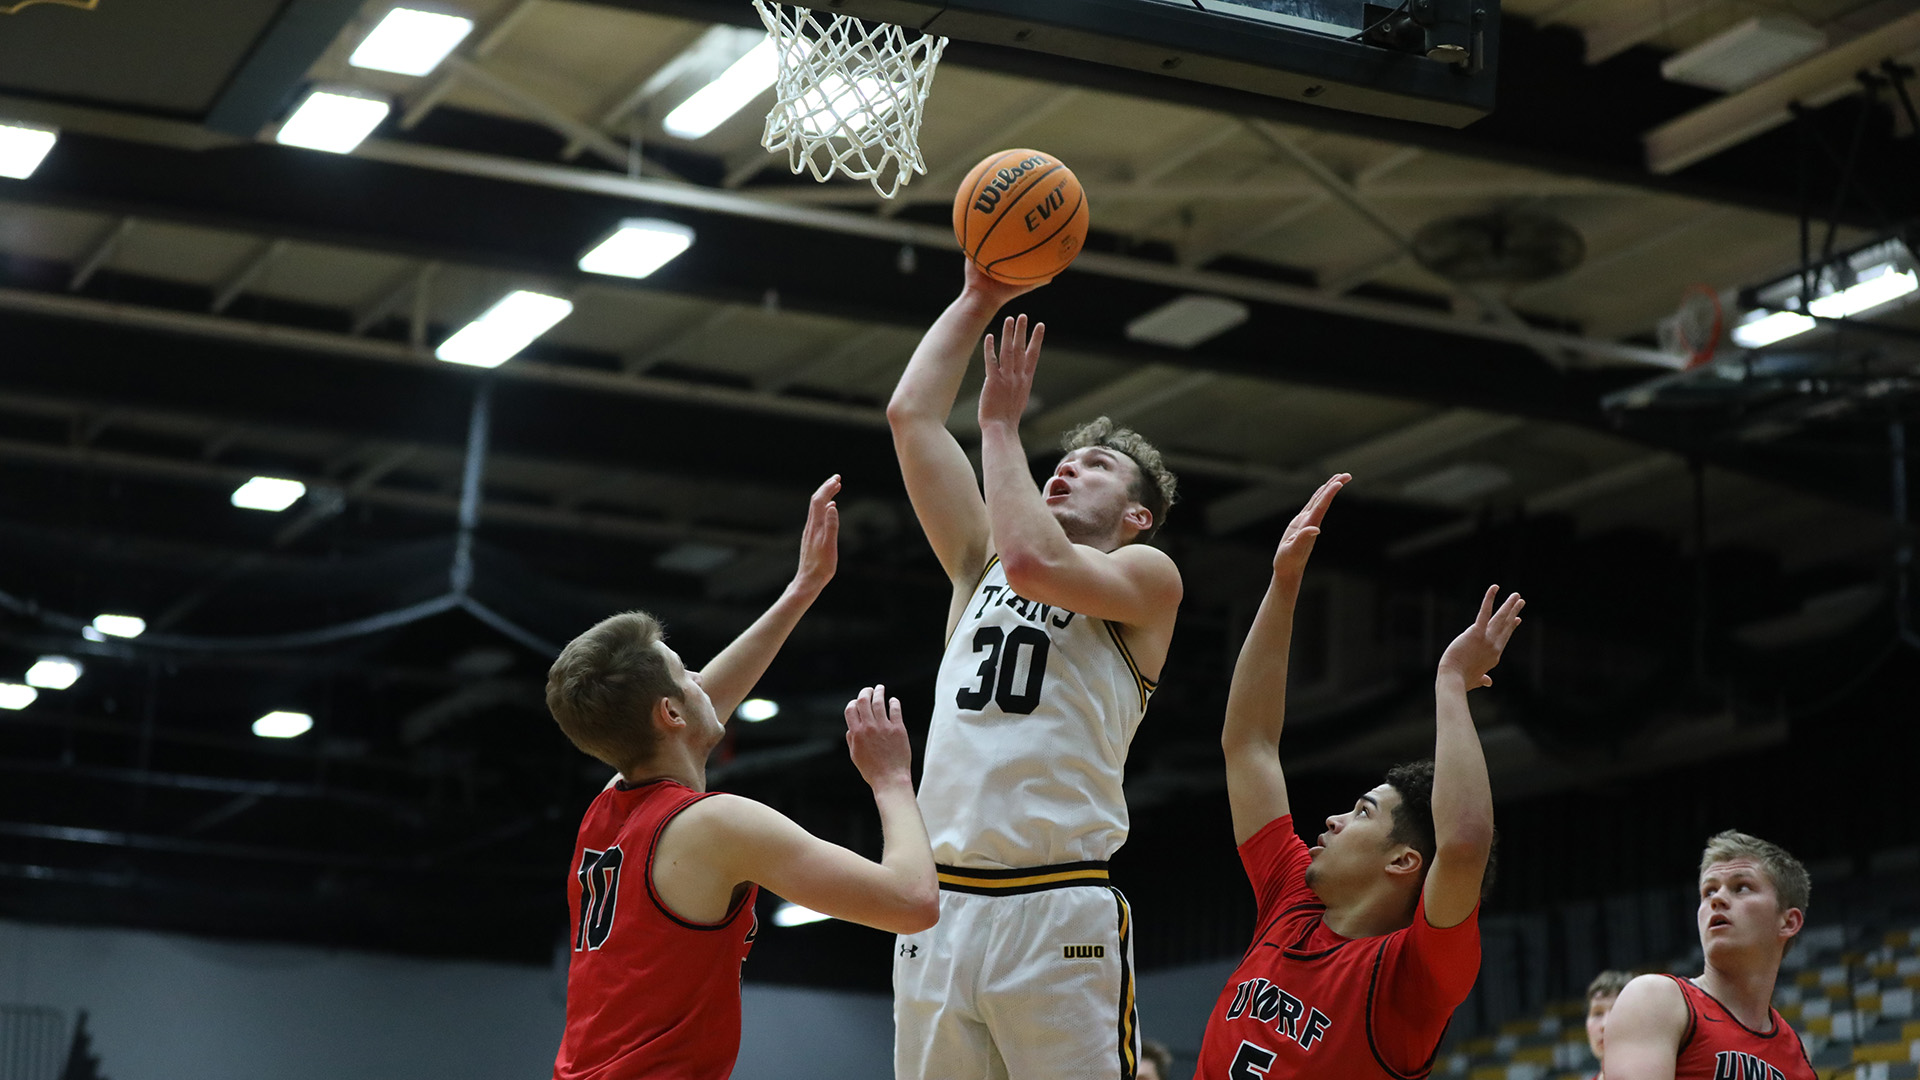 Levi Borchert had a career-high 32 points and 15 rebounds against the Falcons.